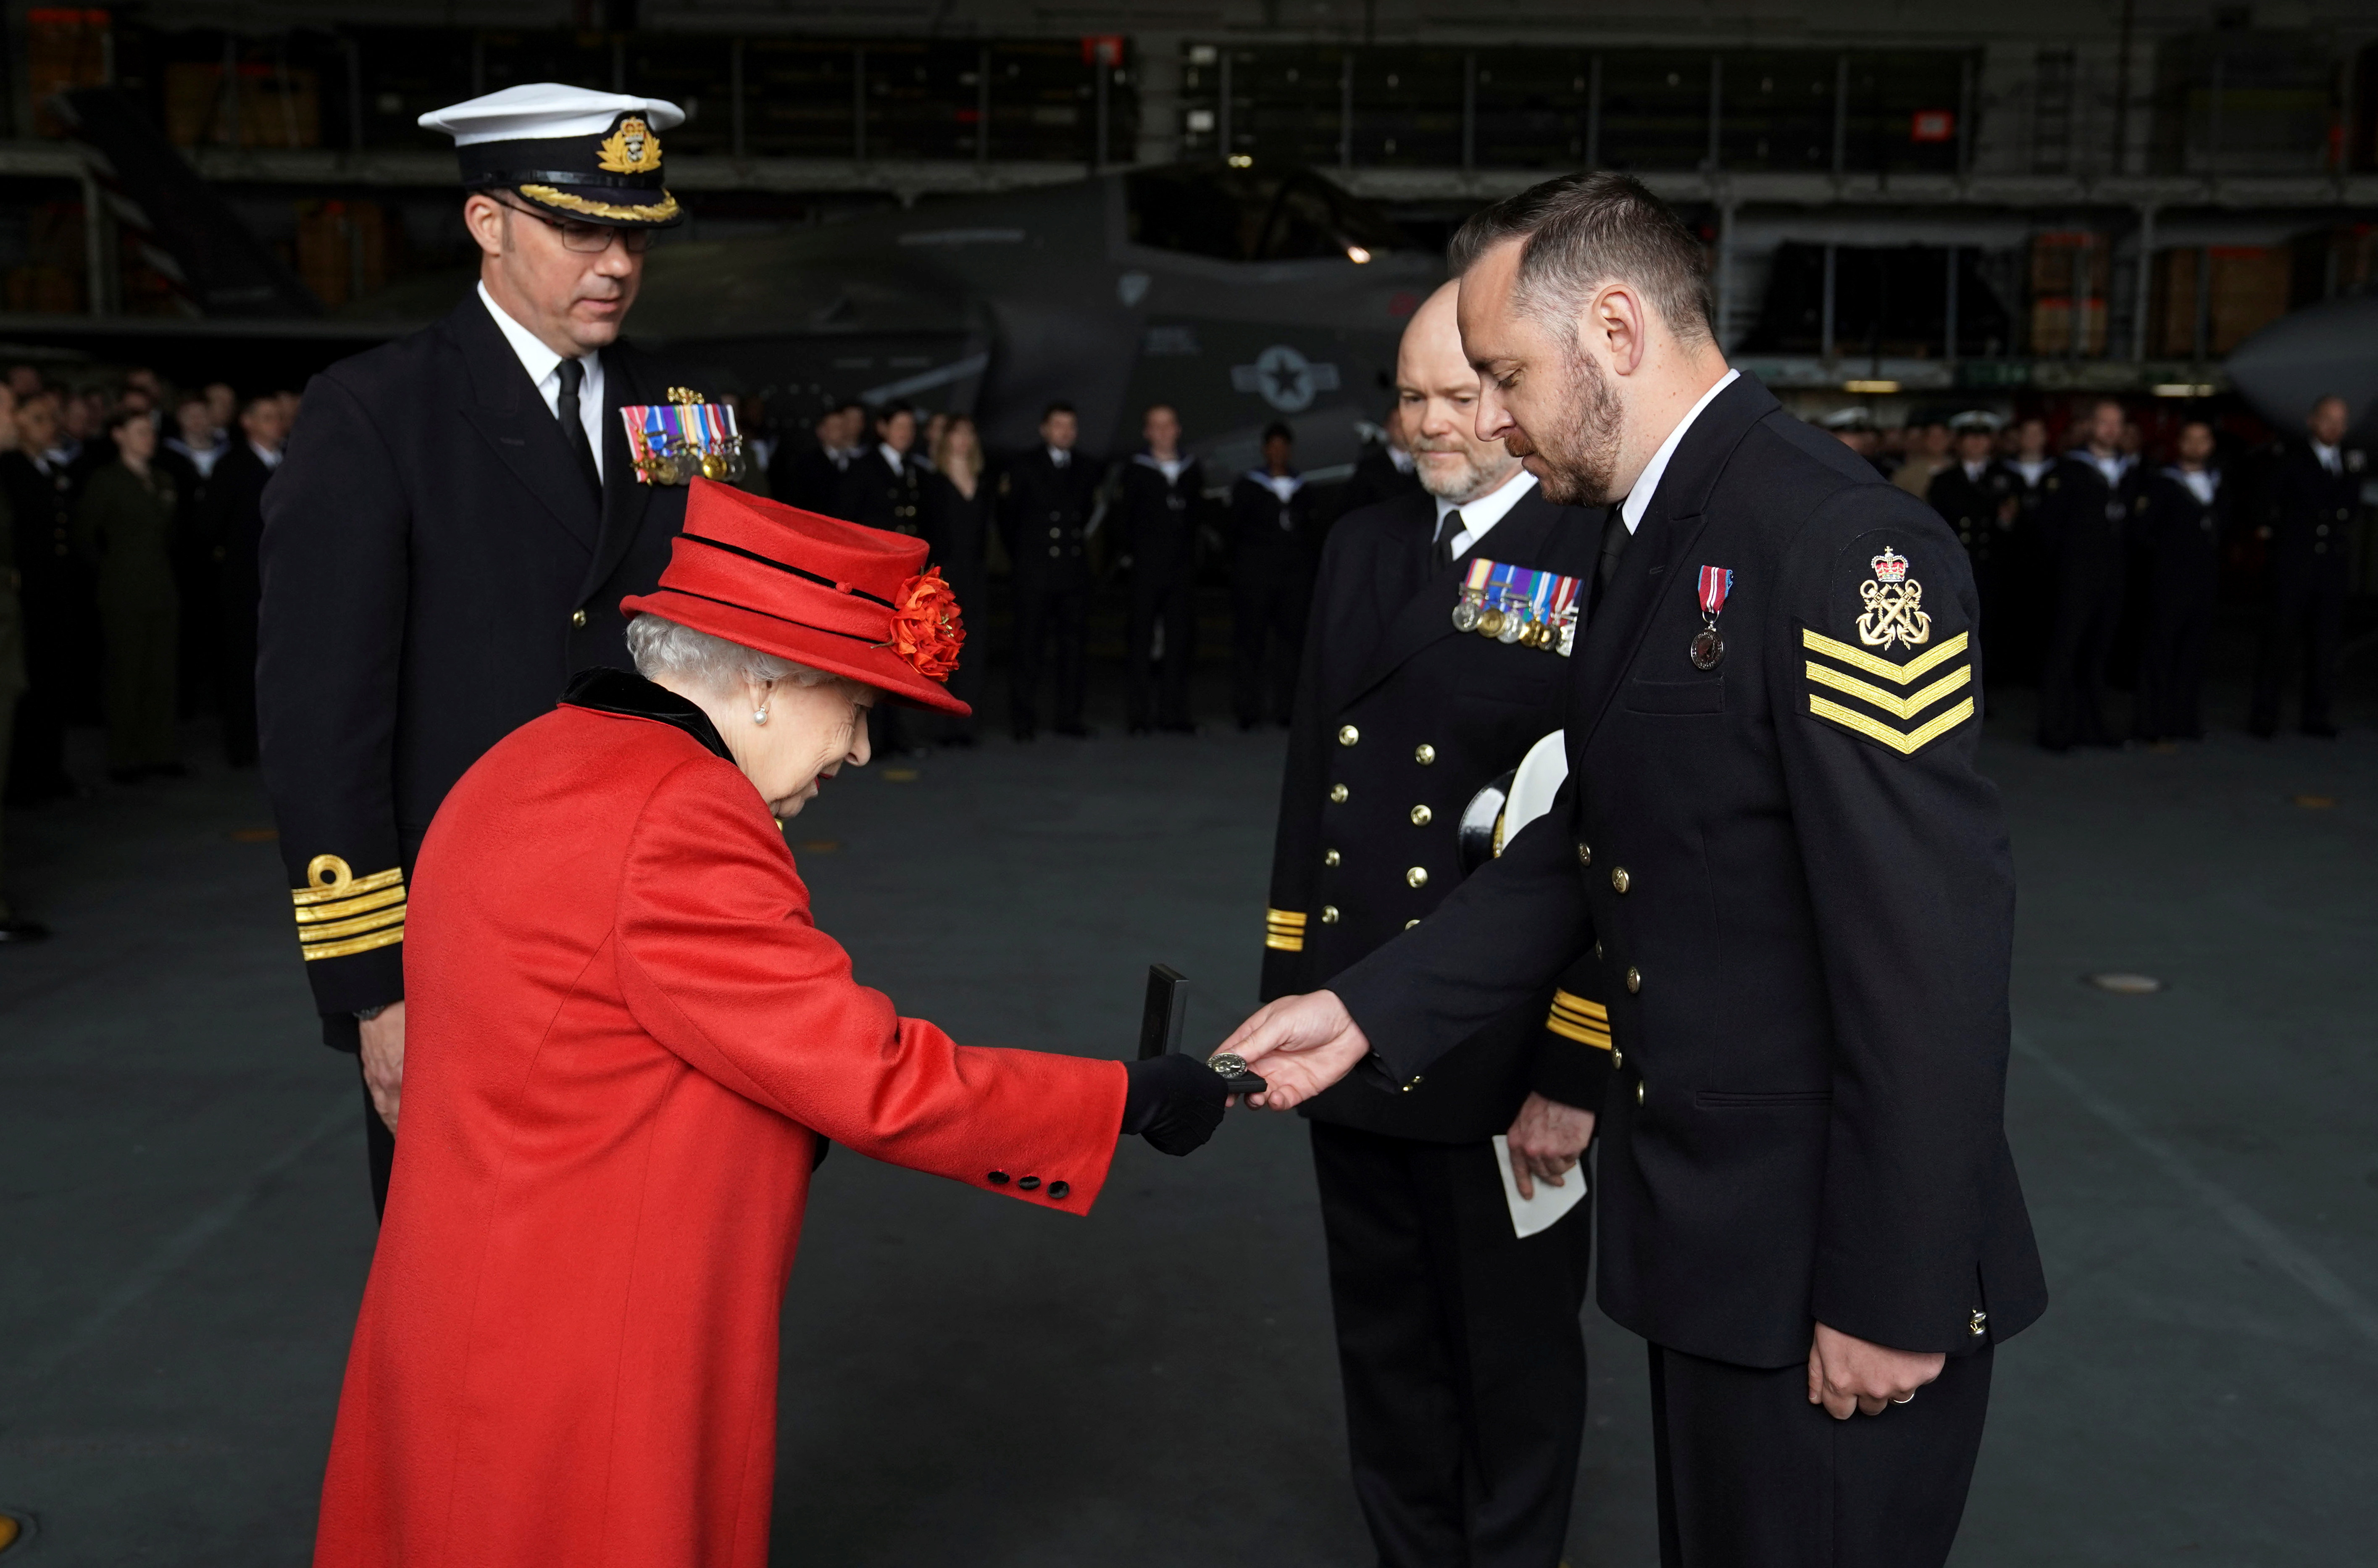 Britain's Queen Elizabeth presents the 15 years long service and good conduct medal to Petty Officer Matthew Ready during a visit to HMS Queen Elizabeth ahead of the ship's maiden deployment at HM Naval Base in Portsmouth, Britain May 22, 2021. Steve Parsons/PA Wire/Pool via REUTERS